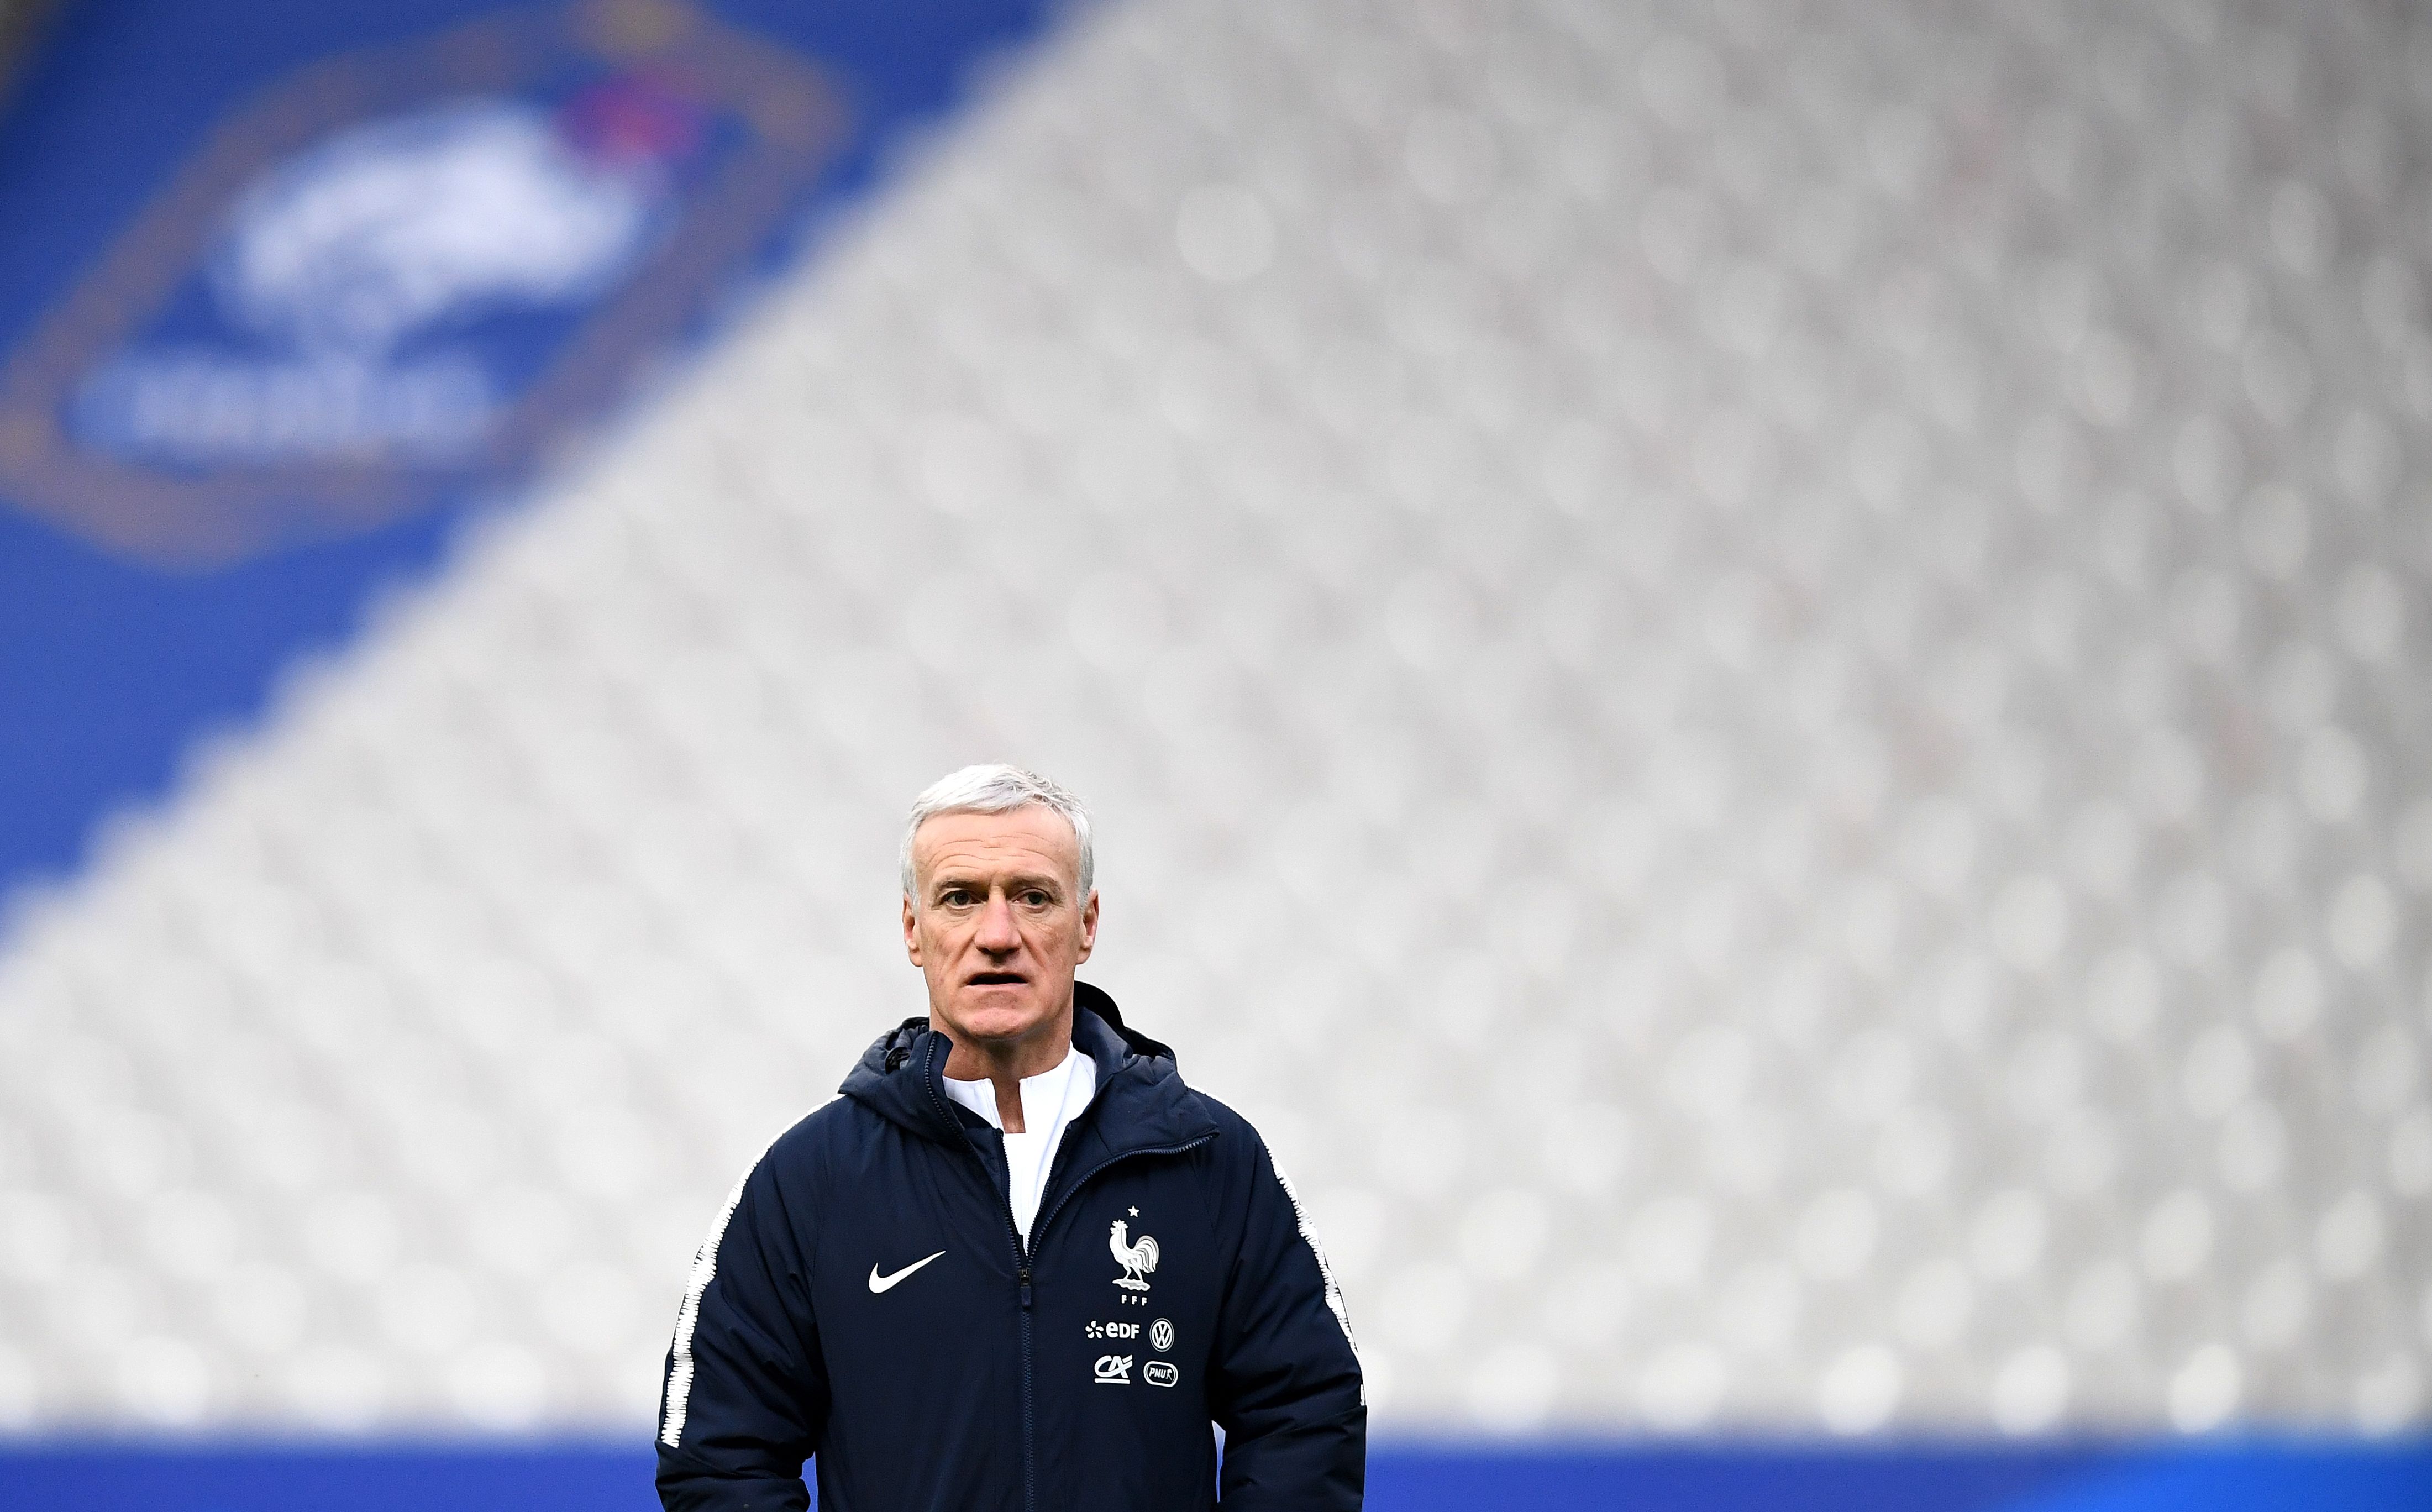 France's head coach Didier Deschamps looks on during a training session at the Stade de France in Saint-Denis, northern Paris, on March 22, 2018 on the eve of the international friendly football match against Colombia. / AFP PHOTO / FRANCK FIFE        (Photo credit should read FRANCK FIFE/AFP/Getty Images)